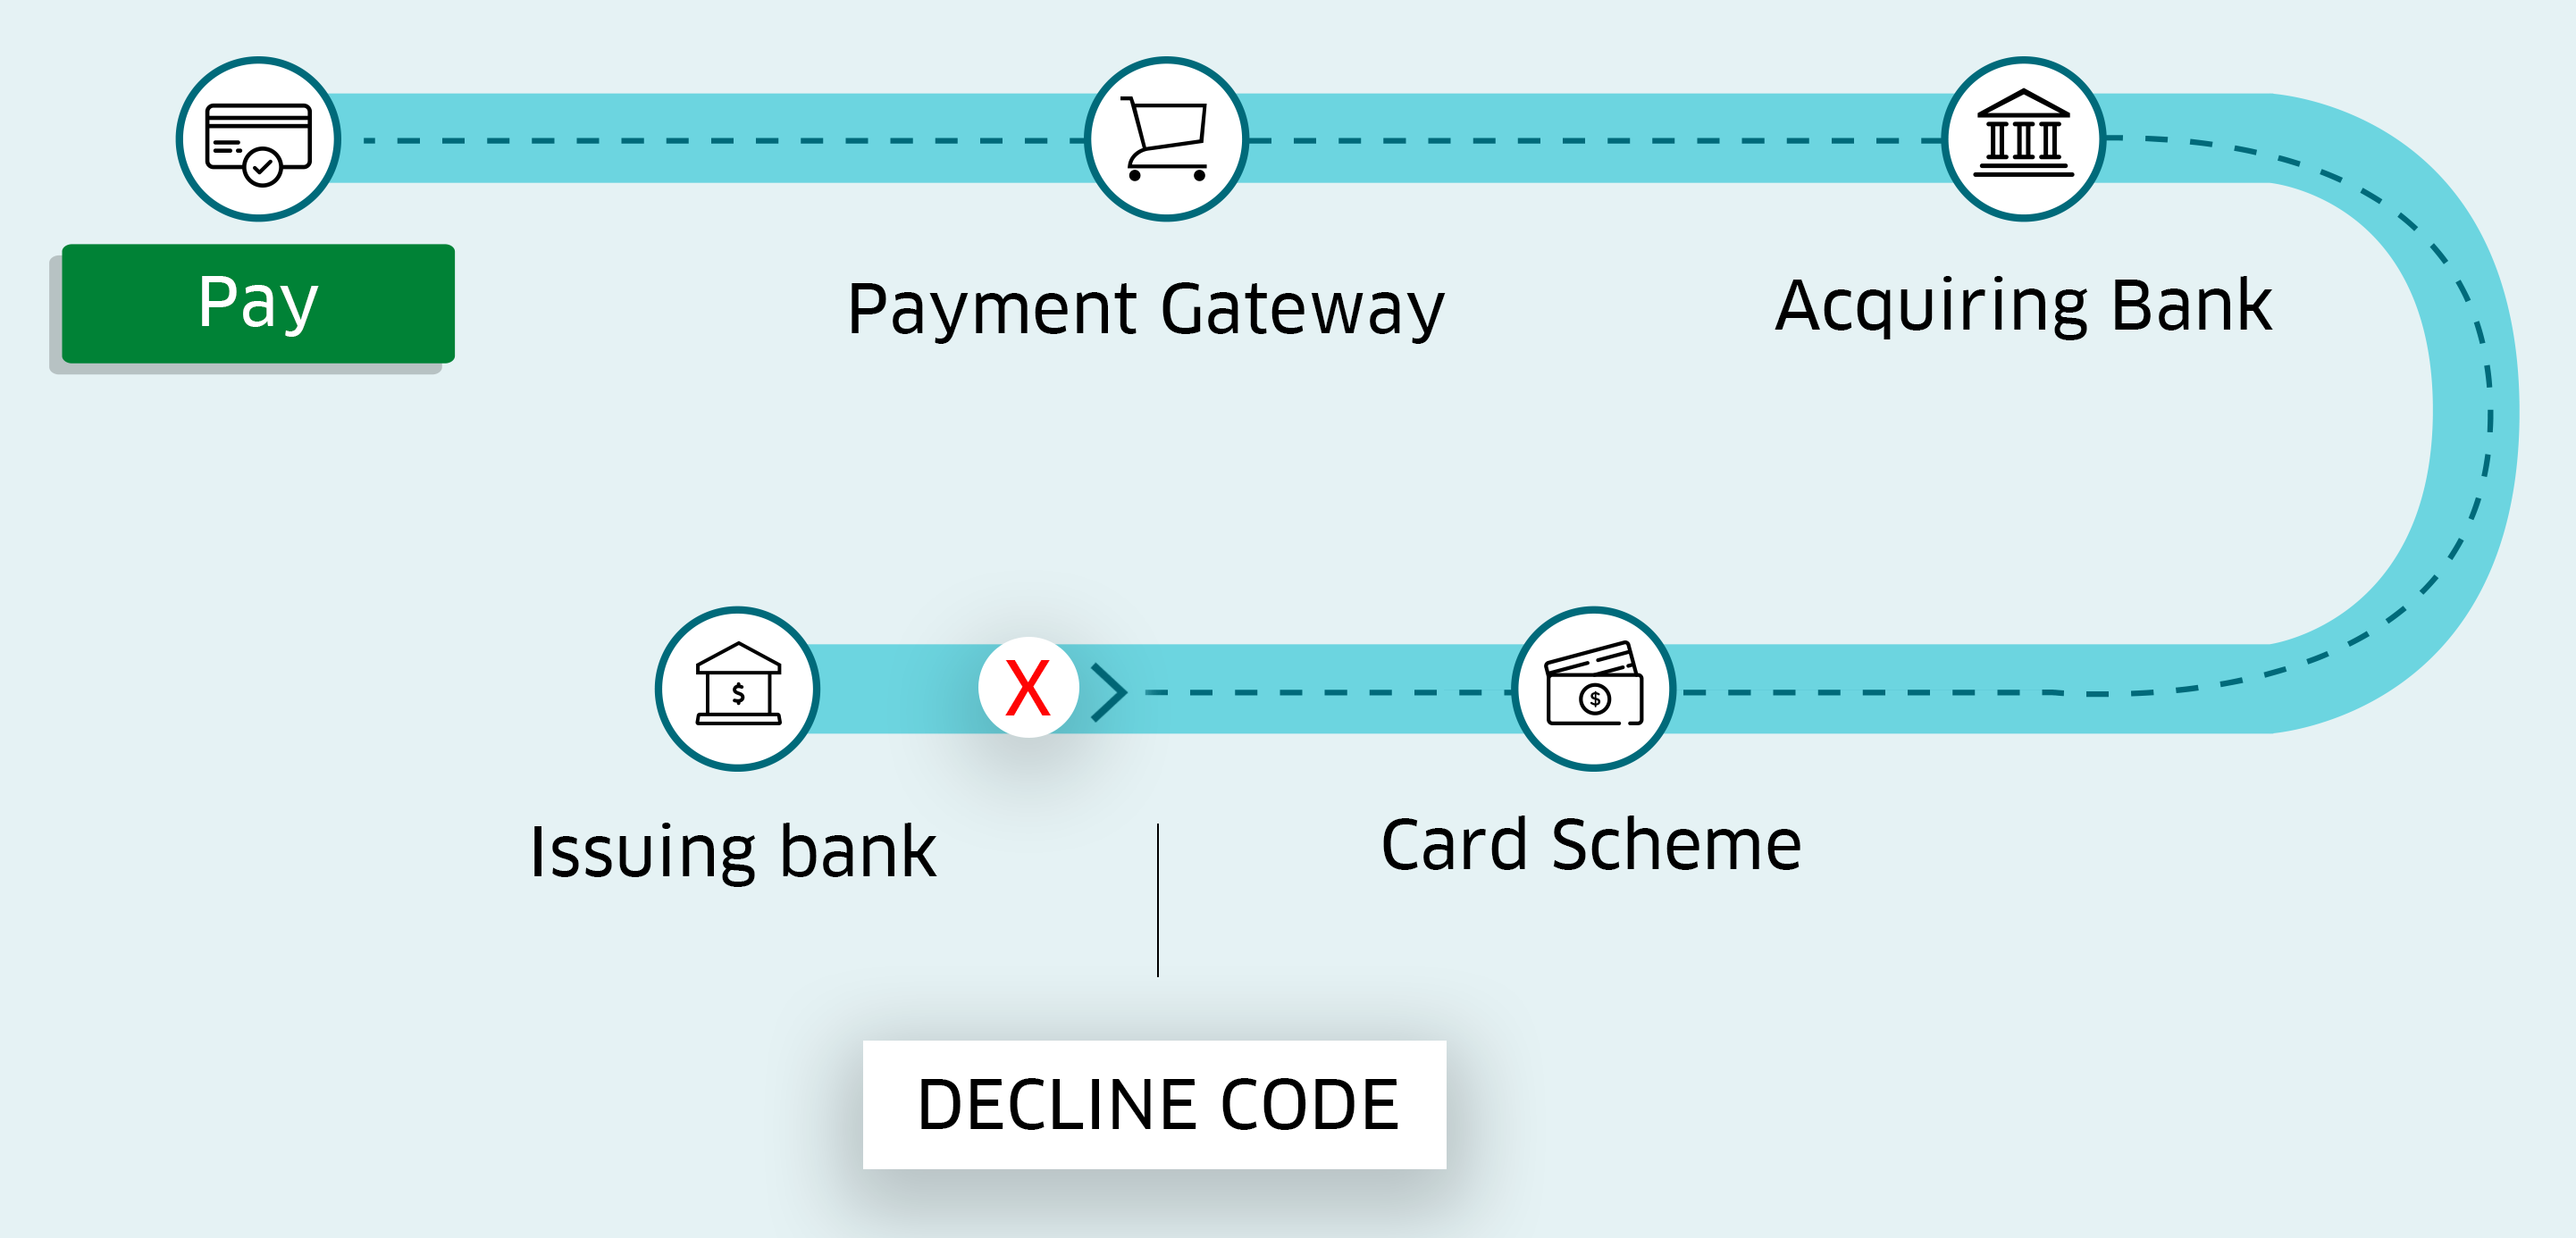 Illustration of where when the decline code happens. 